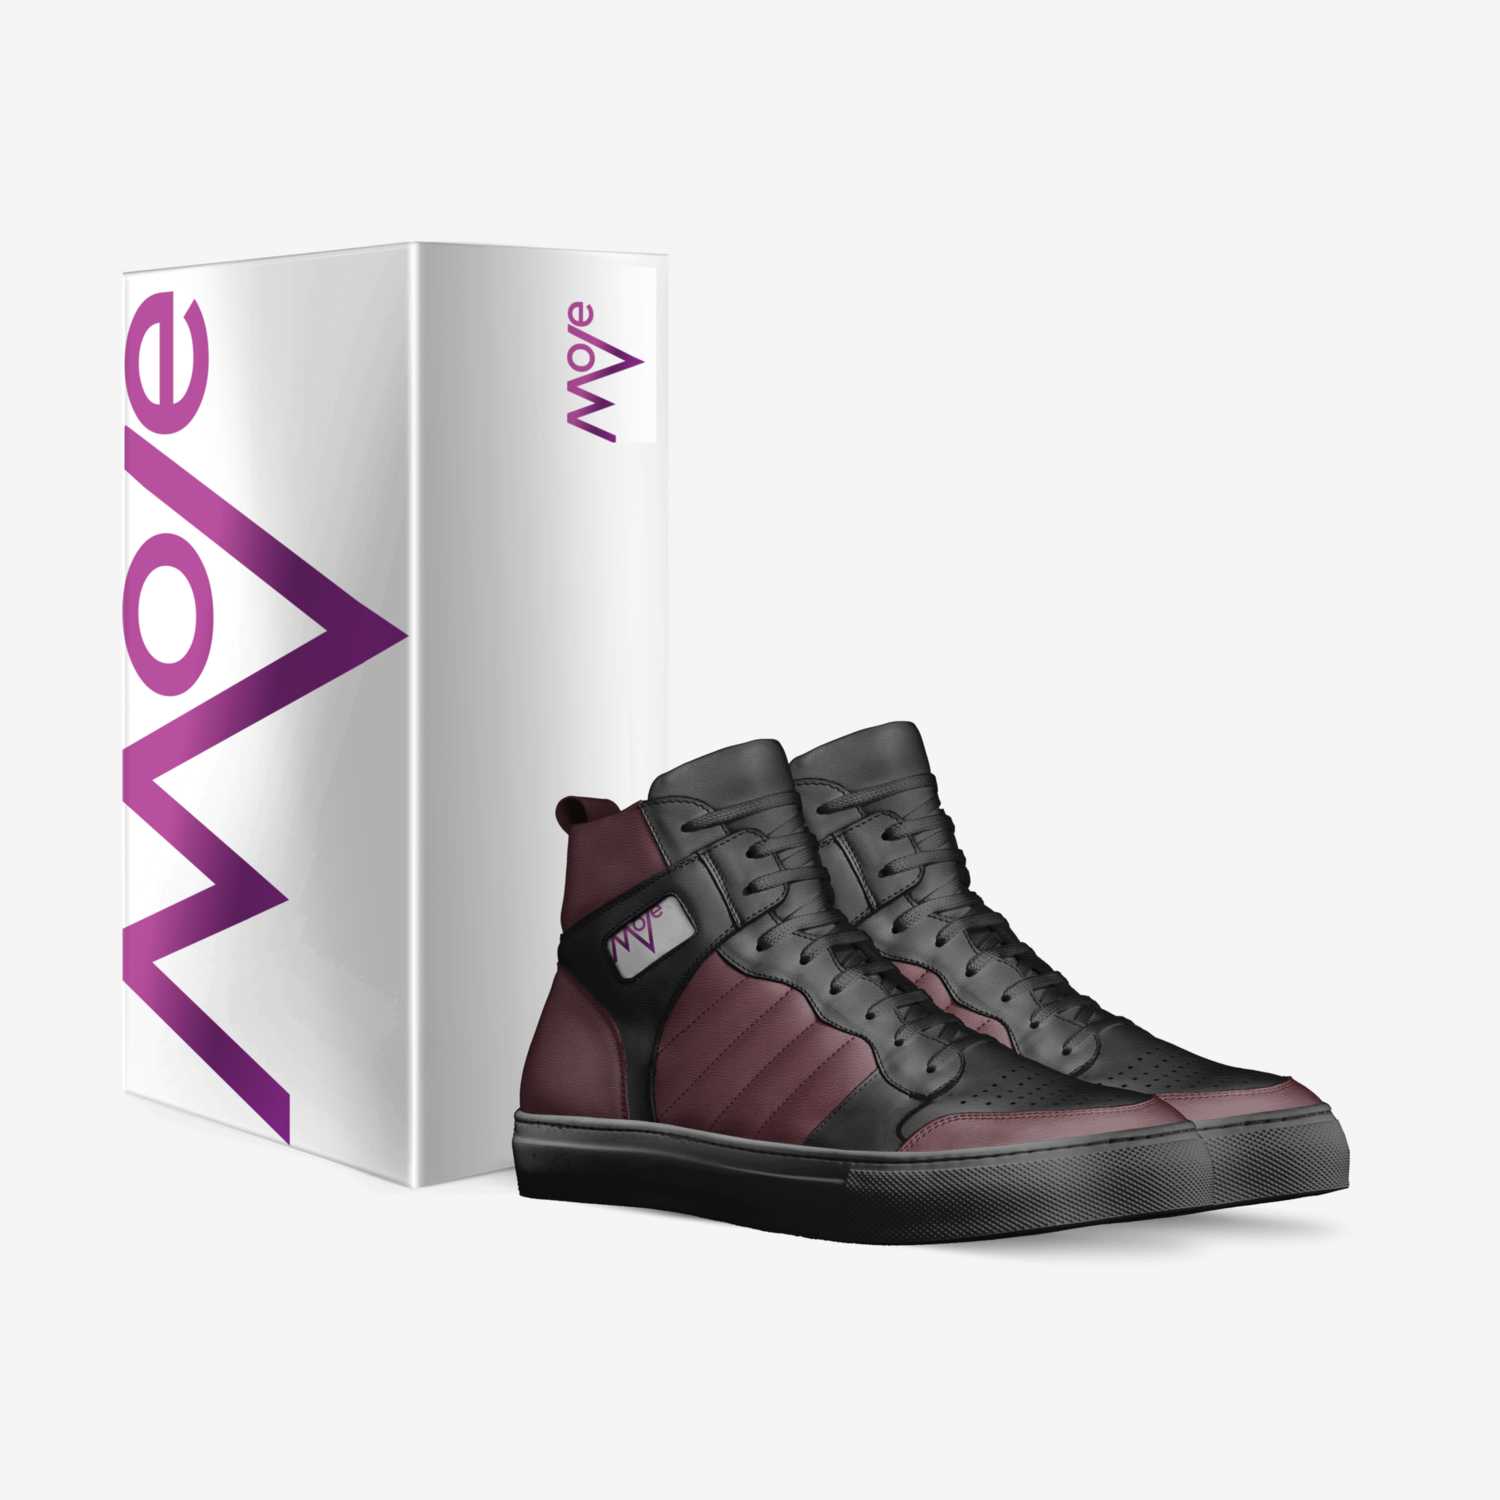 Move custom made in Italy shoes by Marcus Lawrence | Box view